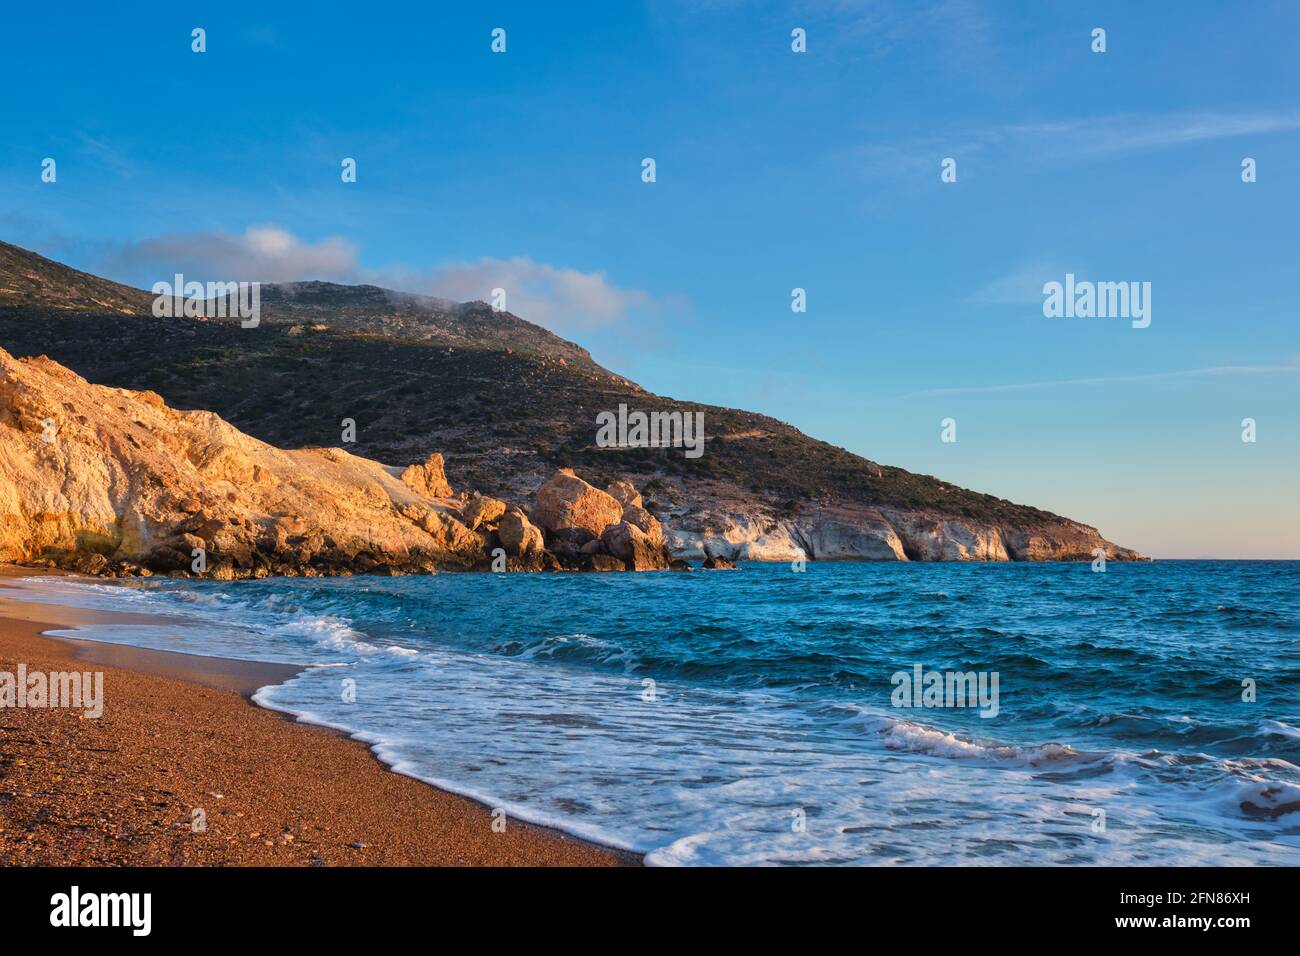 Ioannis High Resolution Stock Photography and Images - Alamy